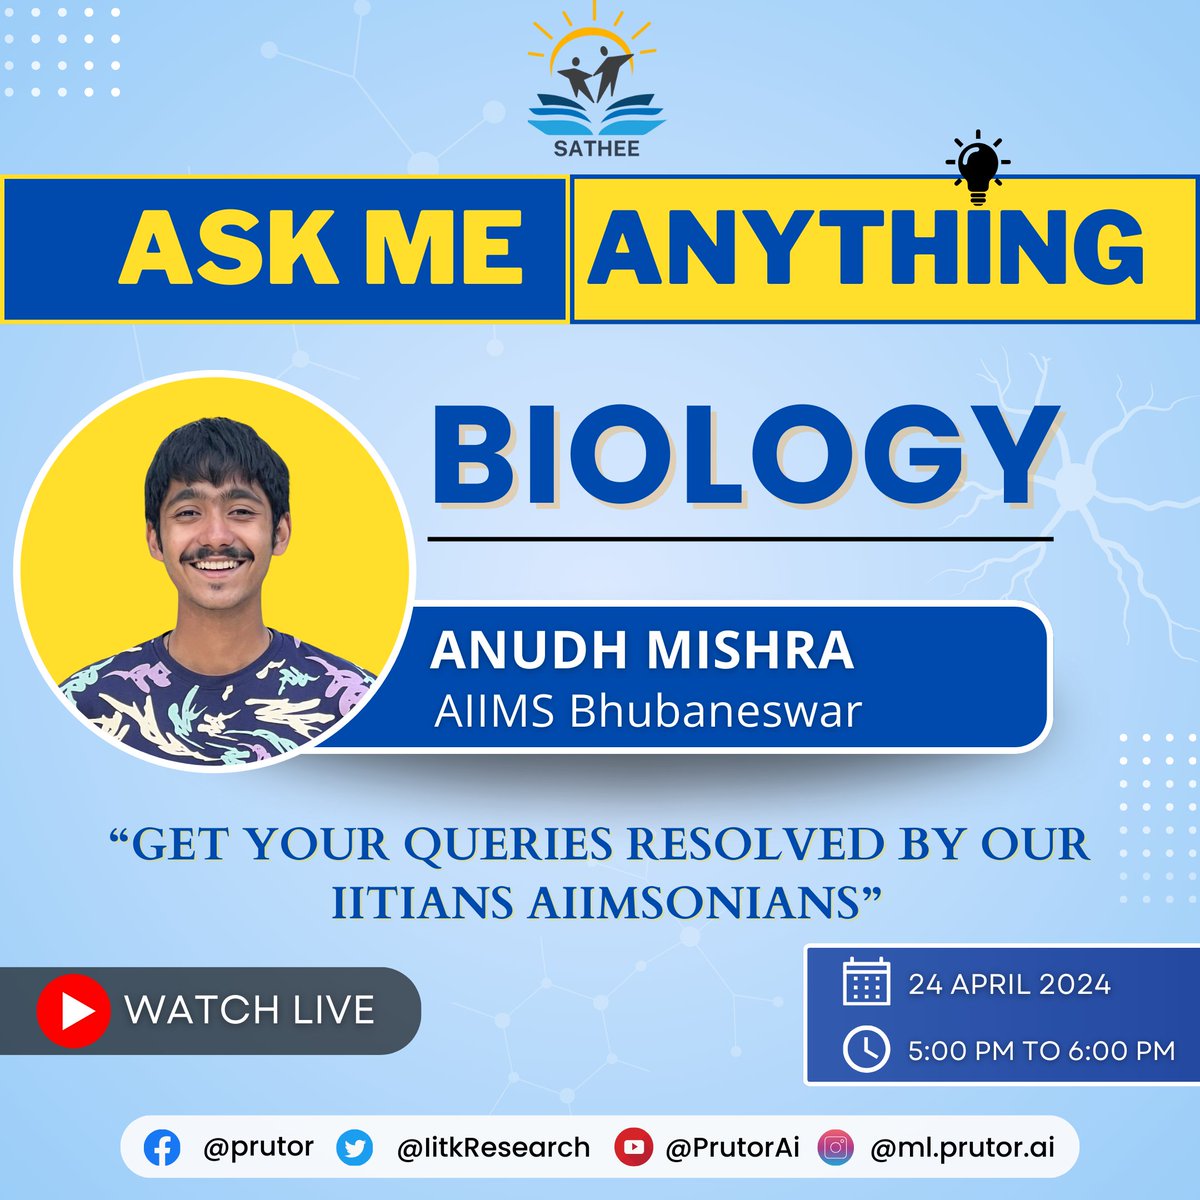 Join Live Ask Me Anything Session on Biology with Anudh Mishra from AIIMS Bhuvneshwar !
Time - 5:00 pm to 6:00 pm
Link for live session - bit.ly/3QiV5KF
#sathee #askmeanything #question_answer #preparation #session #aiims #biologystudent #sciencequestions #NEET #preps…